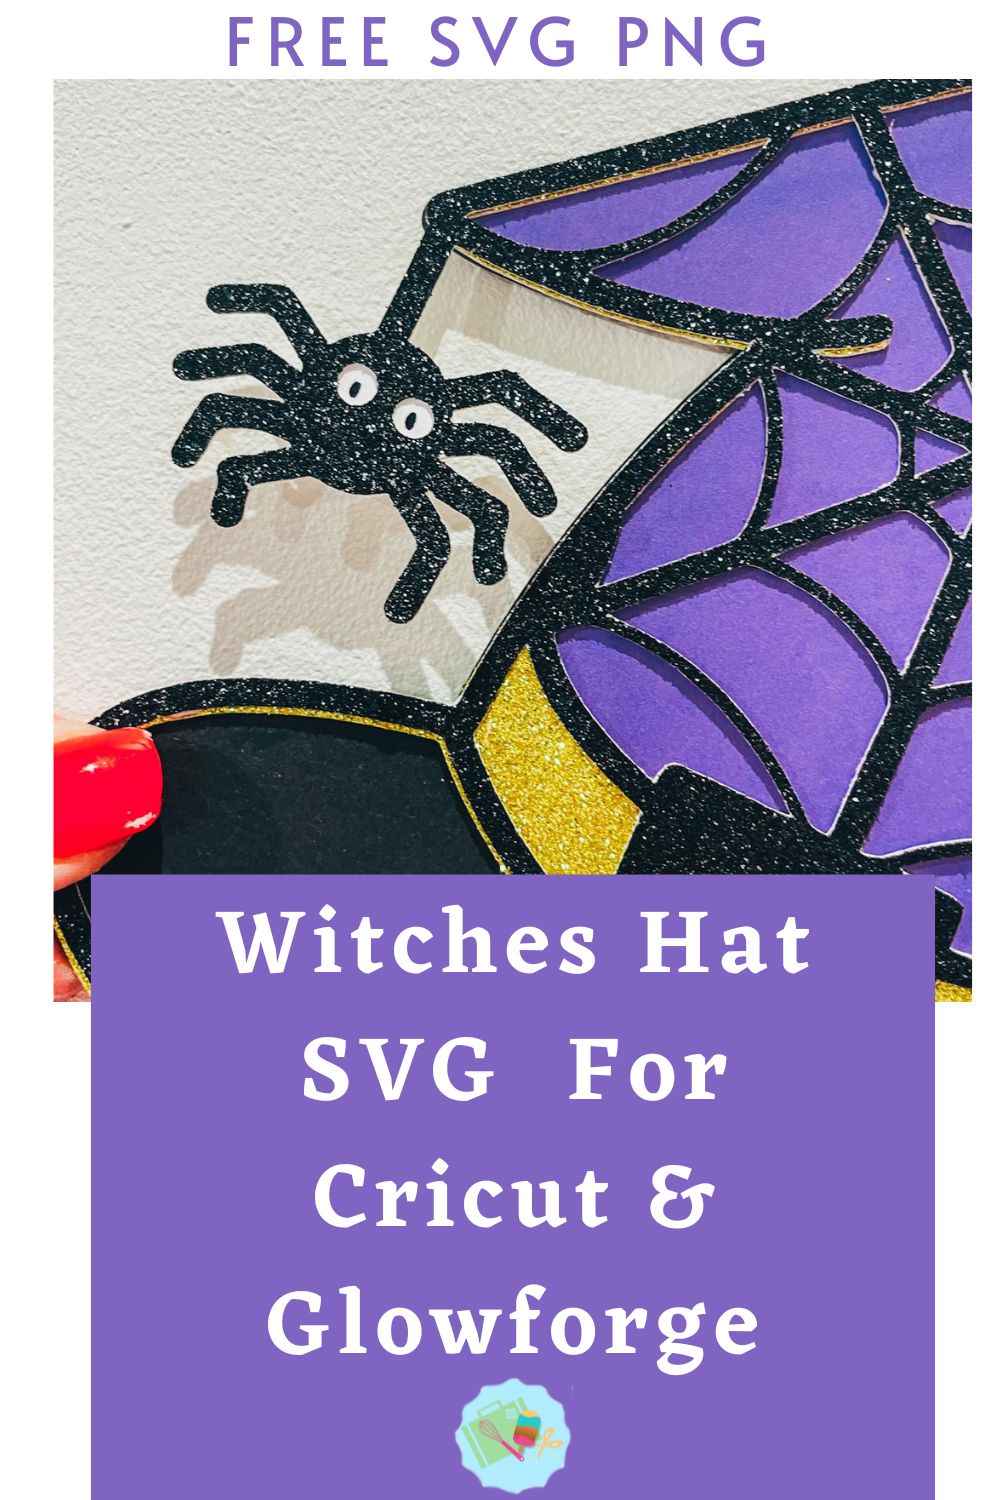 Free Halloween Witches Hat SVG, PNG for Cricut, Glowforge and Silhouette